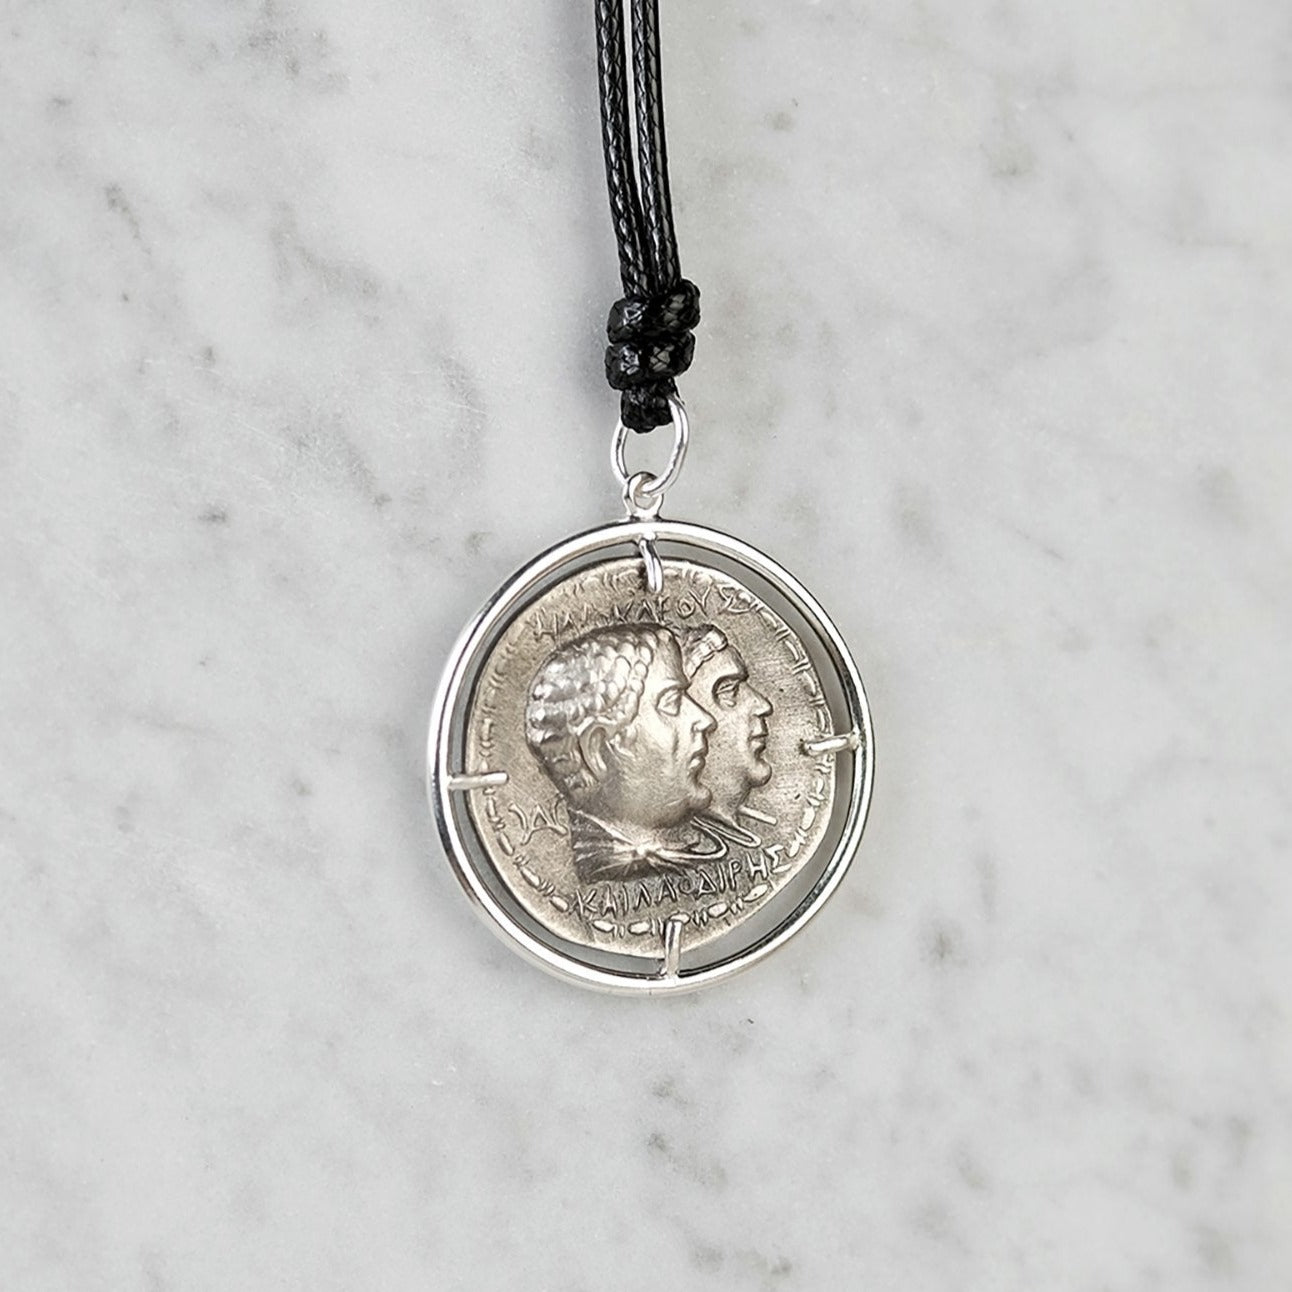 The Madstone Roman coin necklace